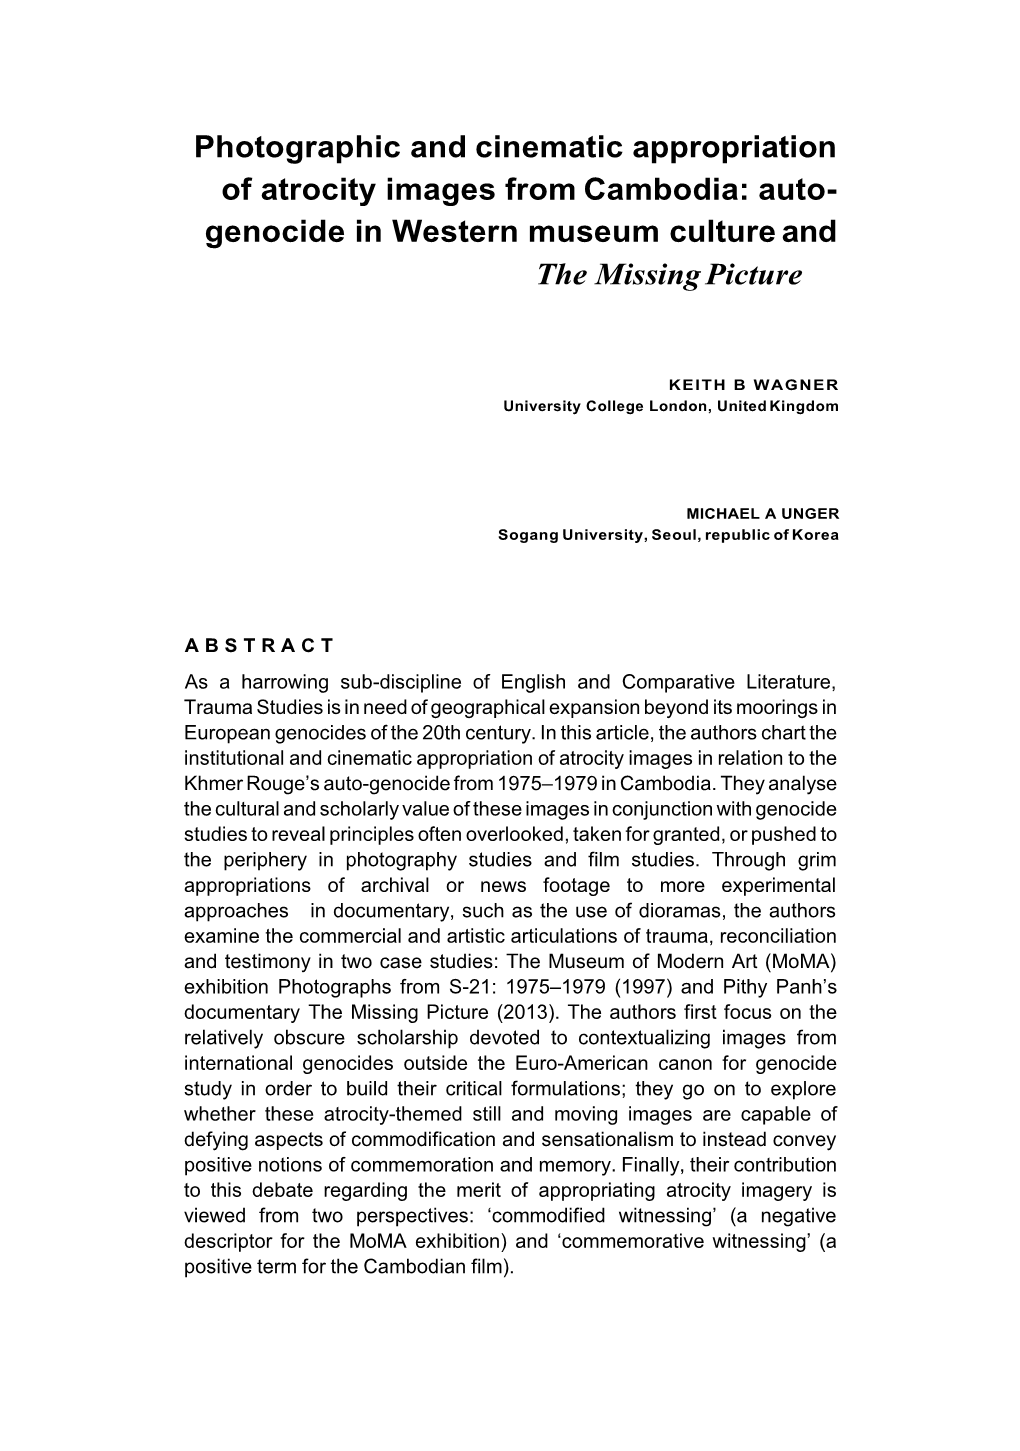 Auto- Genocide in Western Museum Culture and the Missing Picture